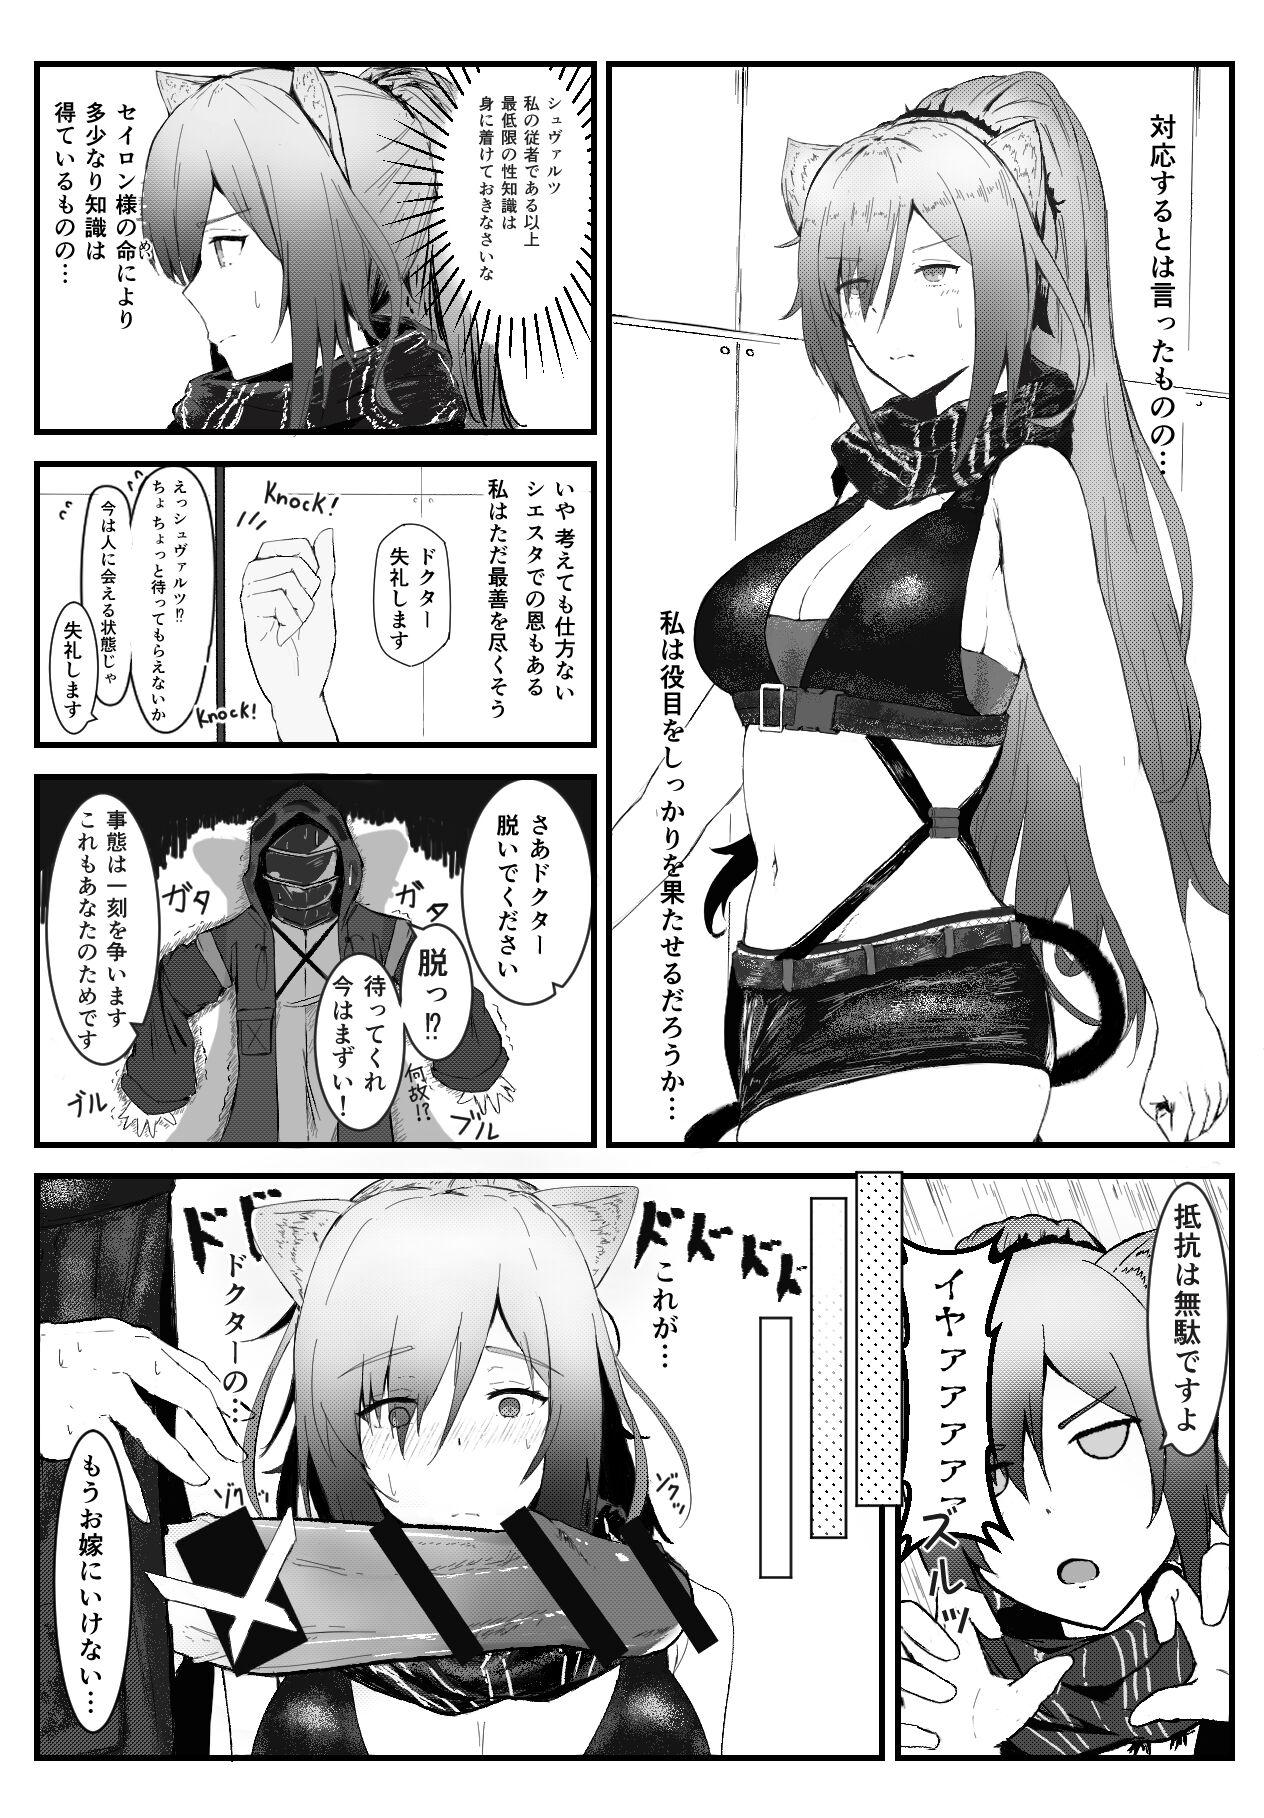 Tiny Titties arknights short story - Arknights Ass Fucking - Picture 2